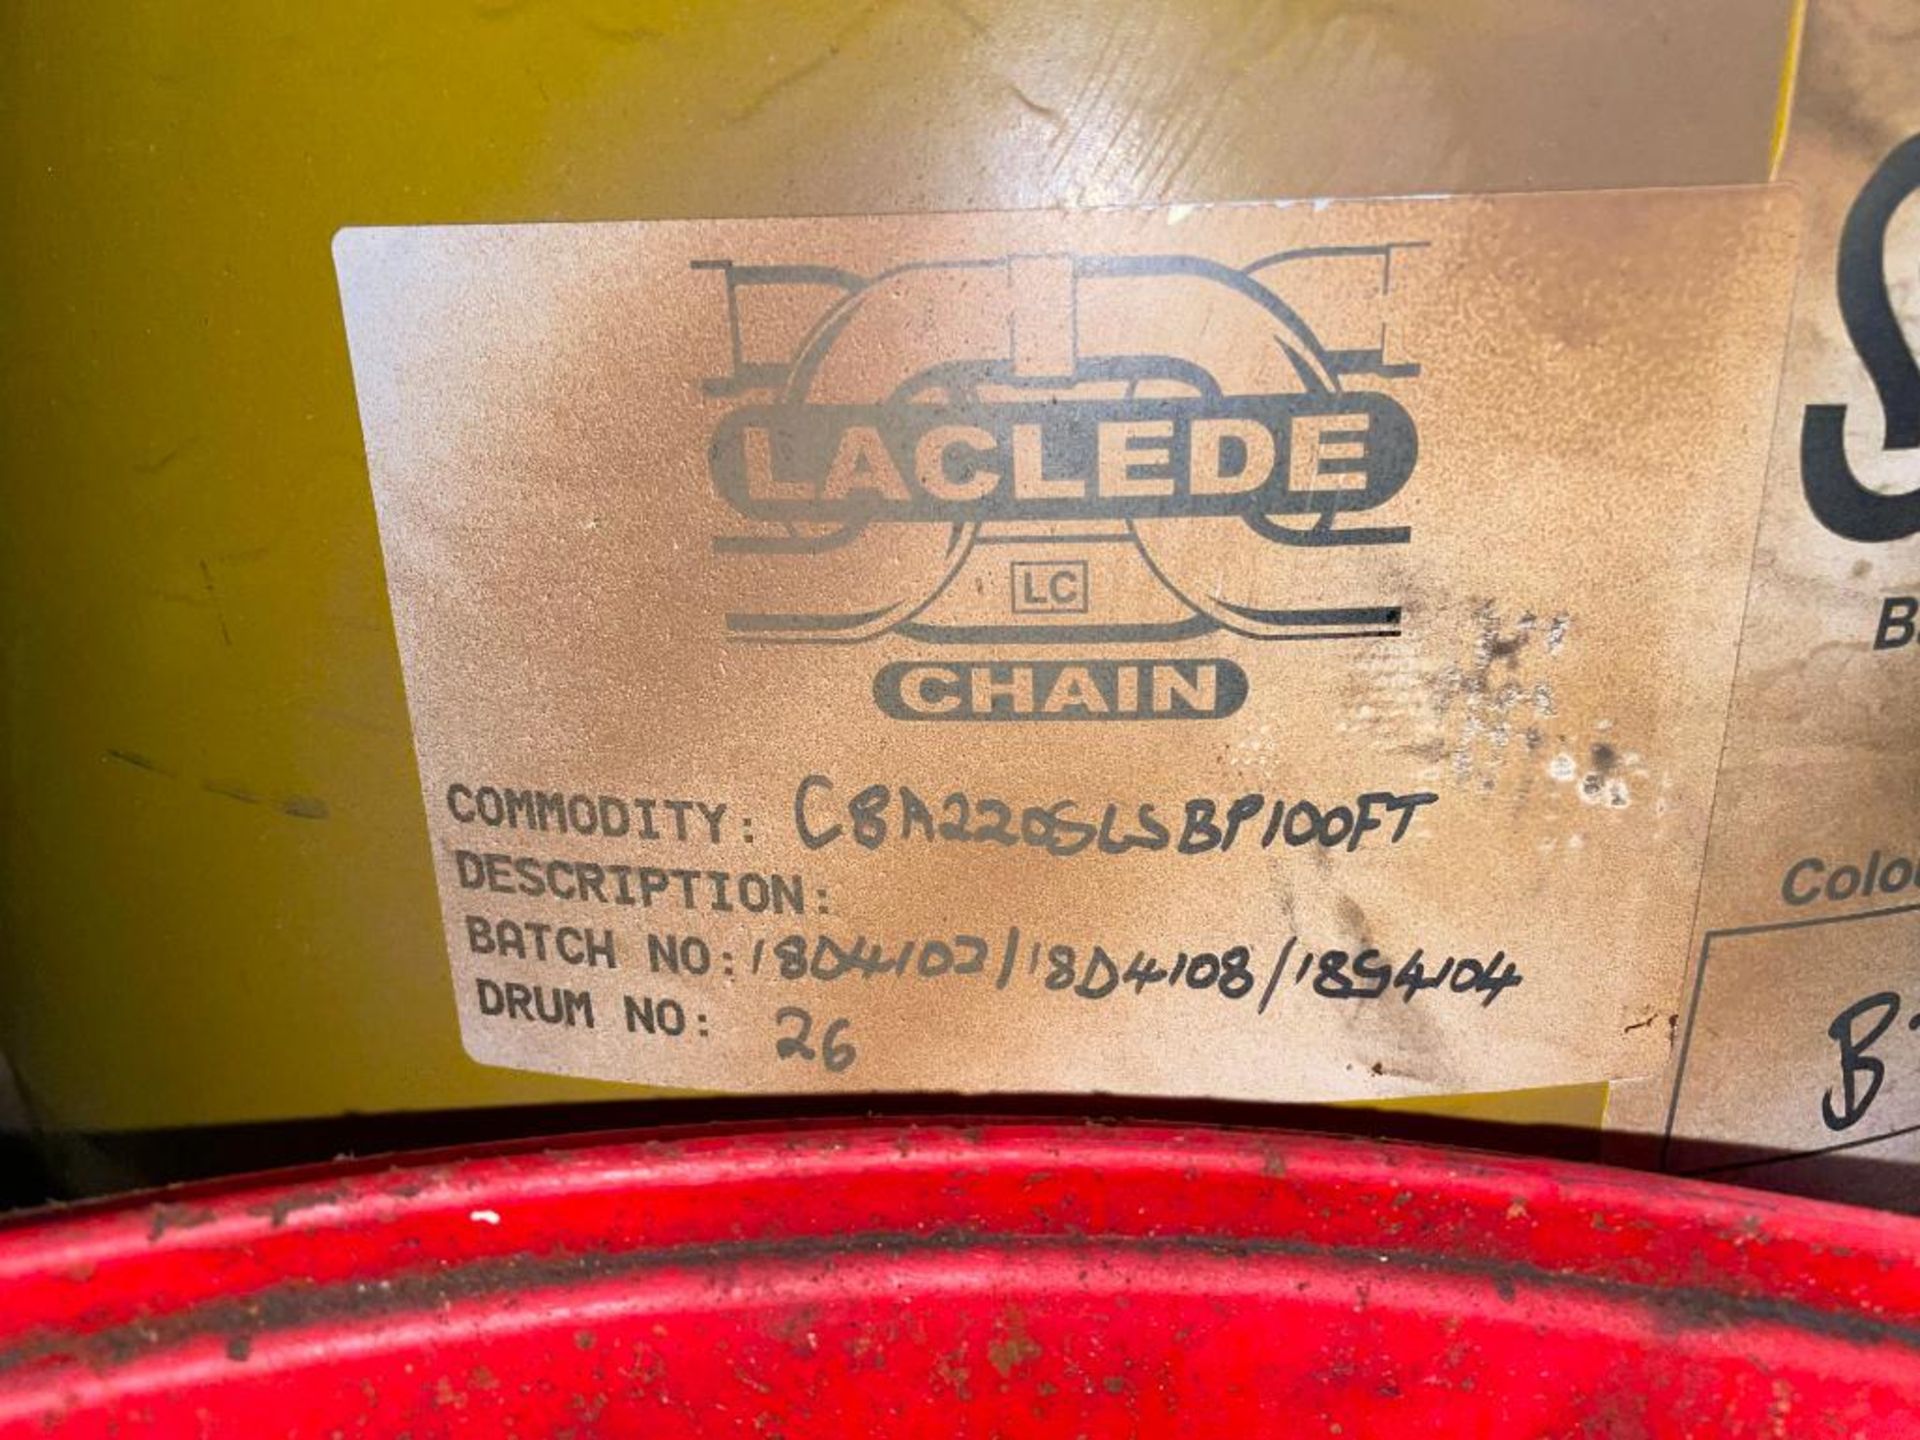 100' X 7/8" G80 SCAW SHORT PIECES HEAT TREAT PROOF TEST BLACK CHAIN BRAND/MODEL: LACLEDE CHAIN MFG S - Image 7 of 9